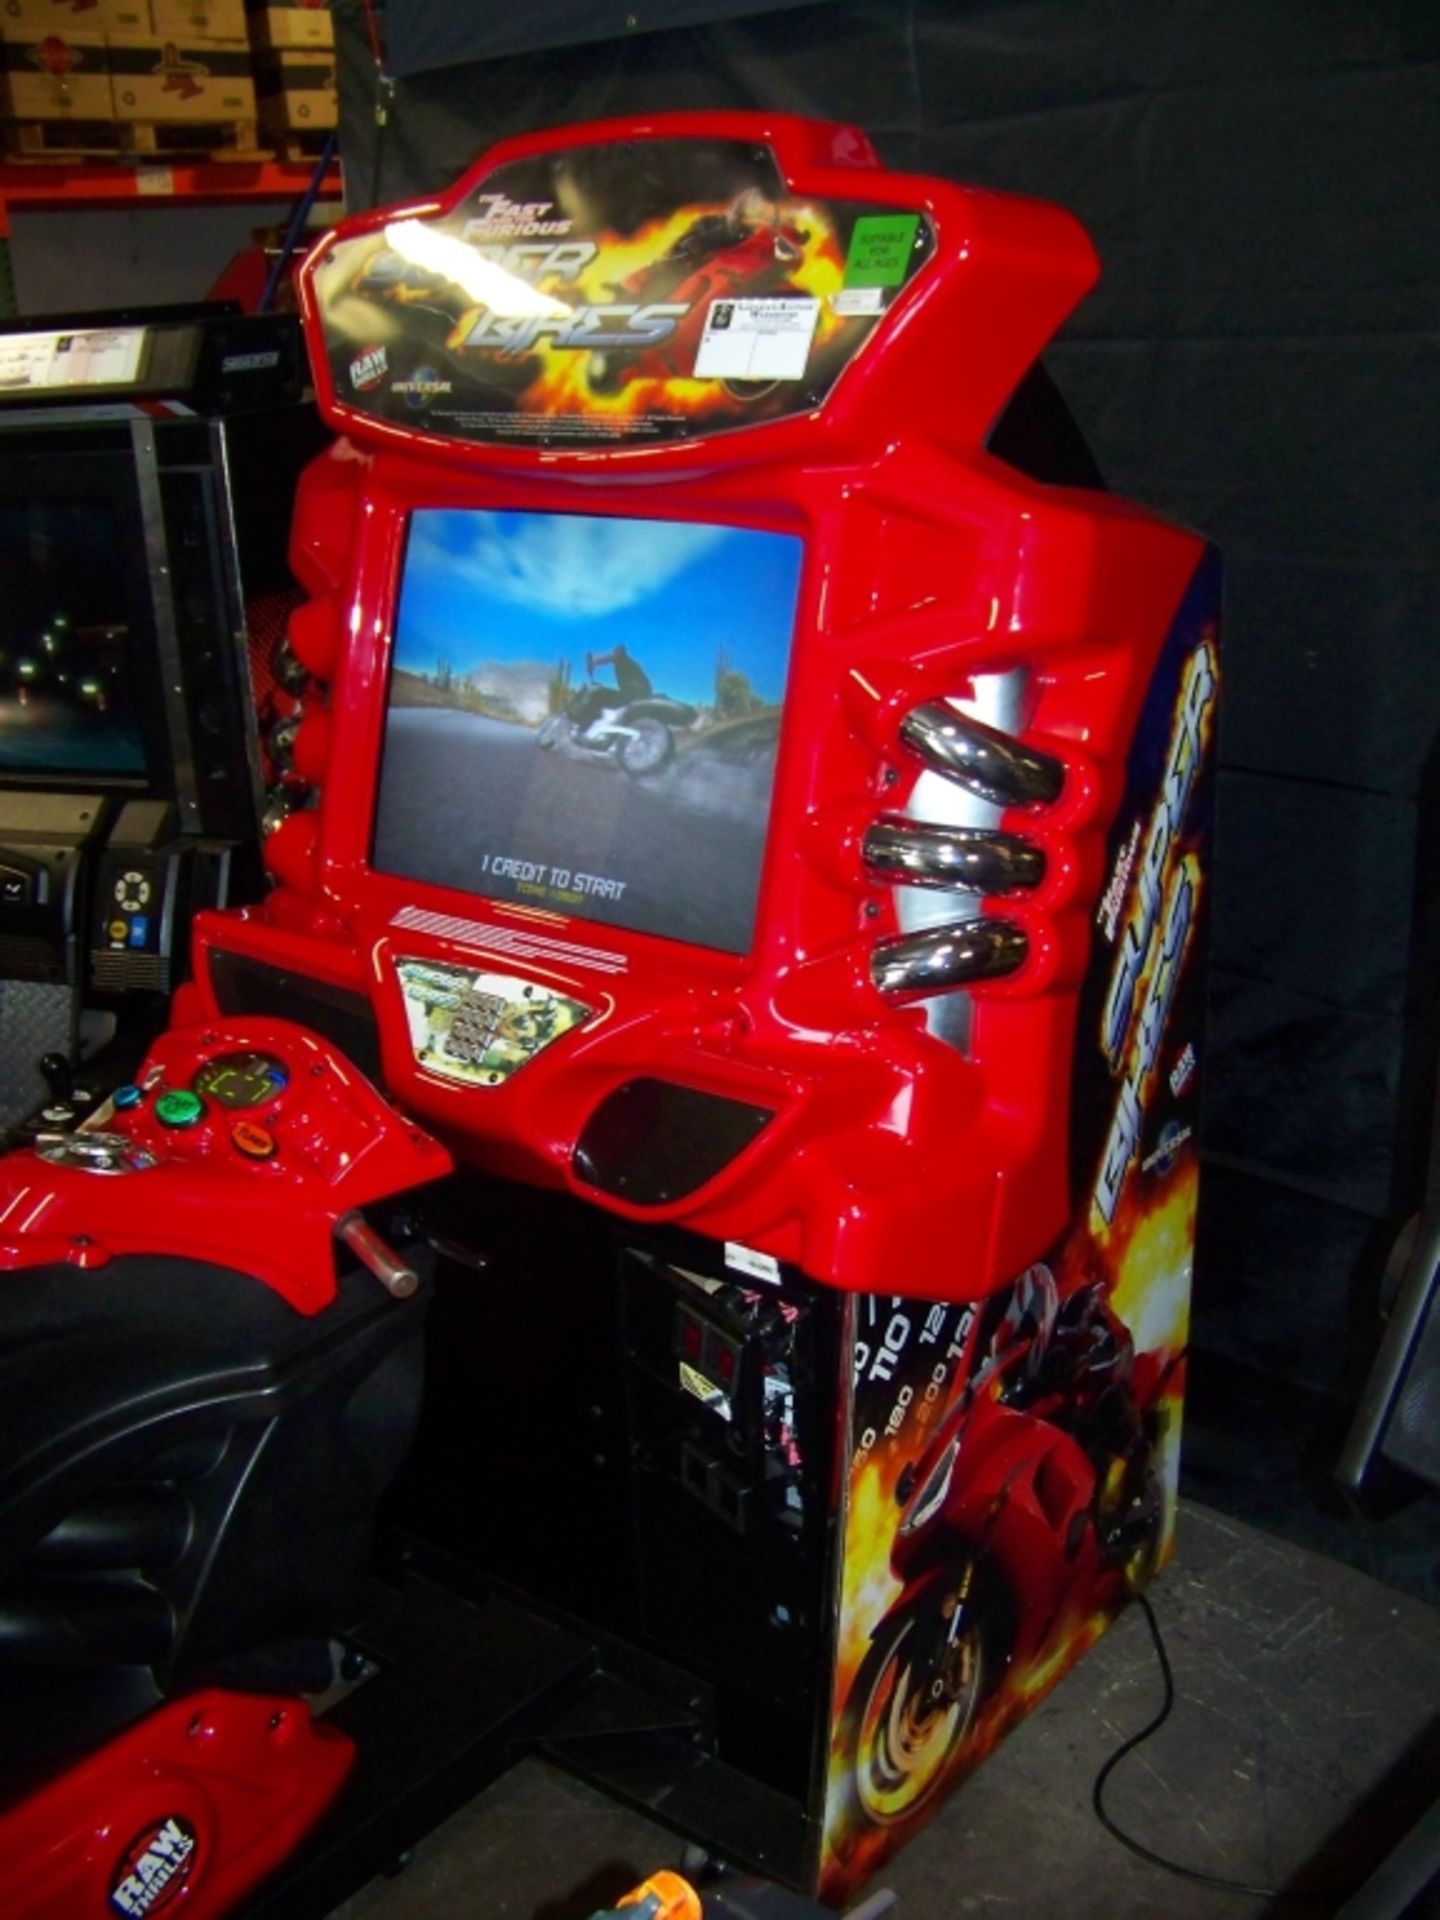 FAST & FURIOUS SUPER BIKES RED RACING ARCADE GAME - Image 2 of 6